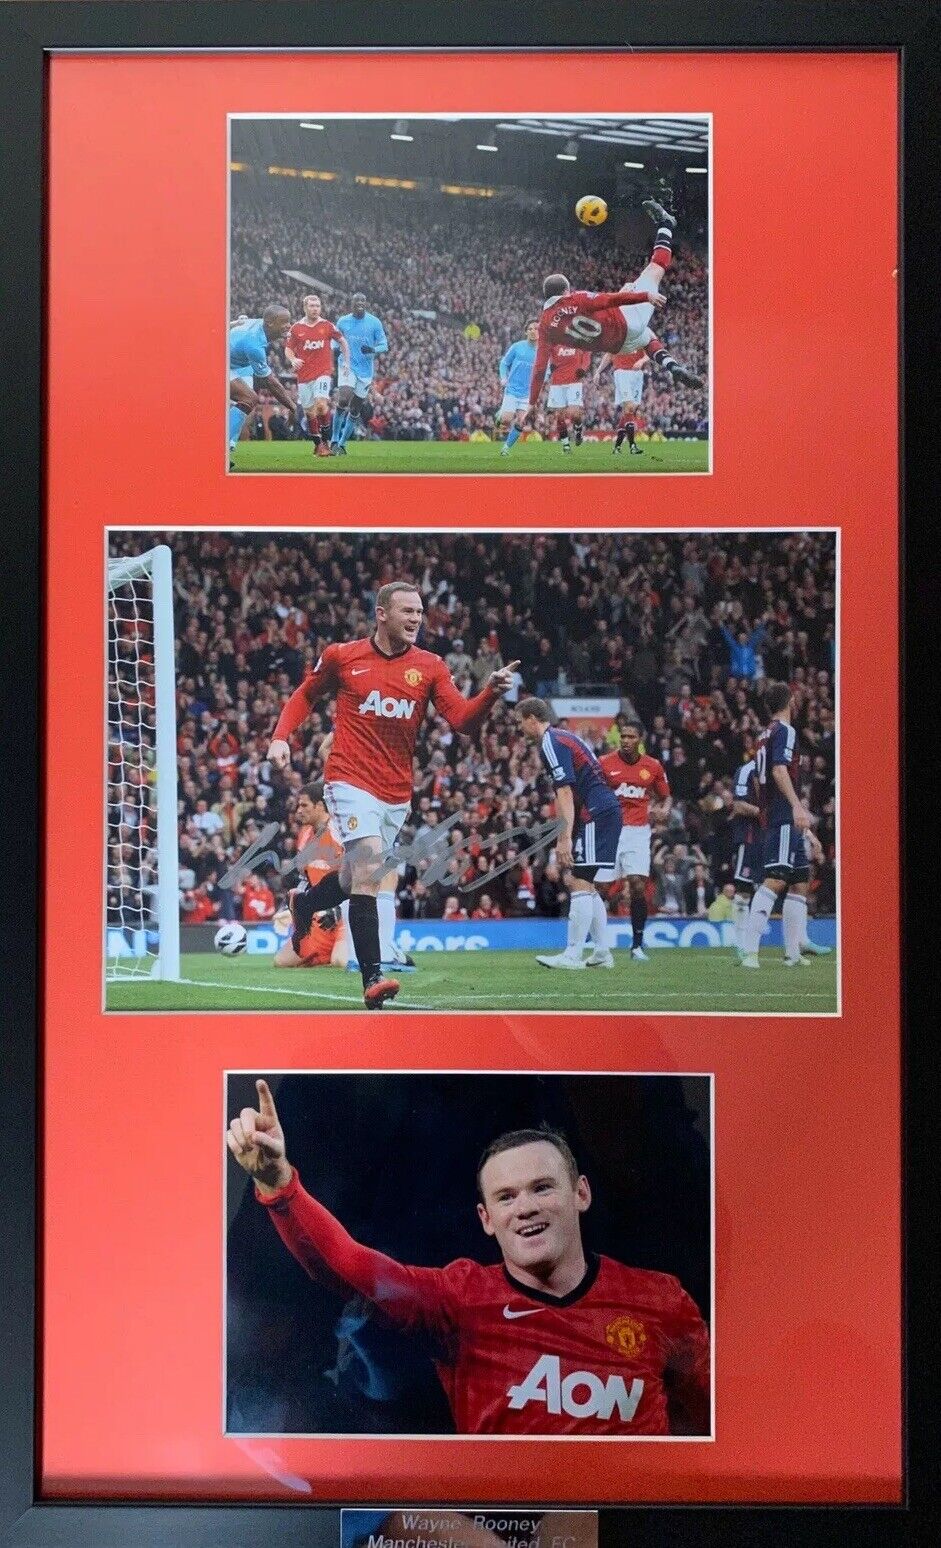 Wayne Rooney Genuine Hand Signed 12x8 Man United Photo Poster painting In Frame, Derby County